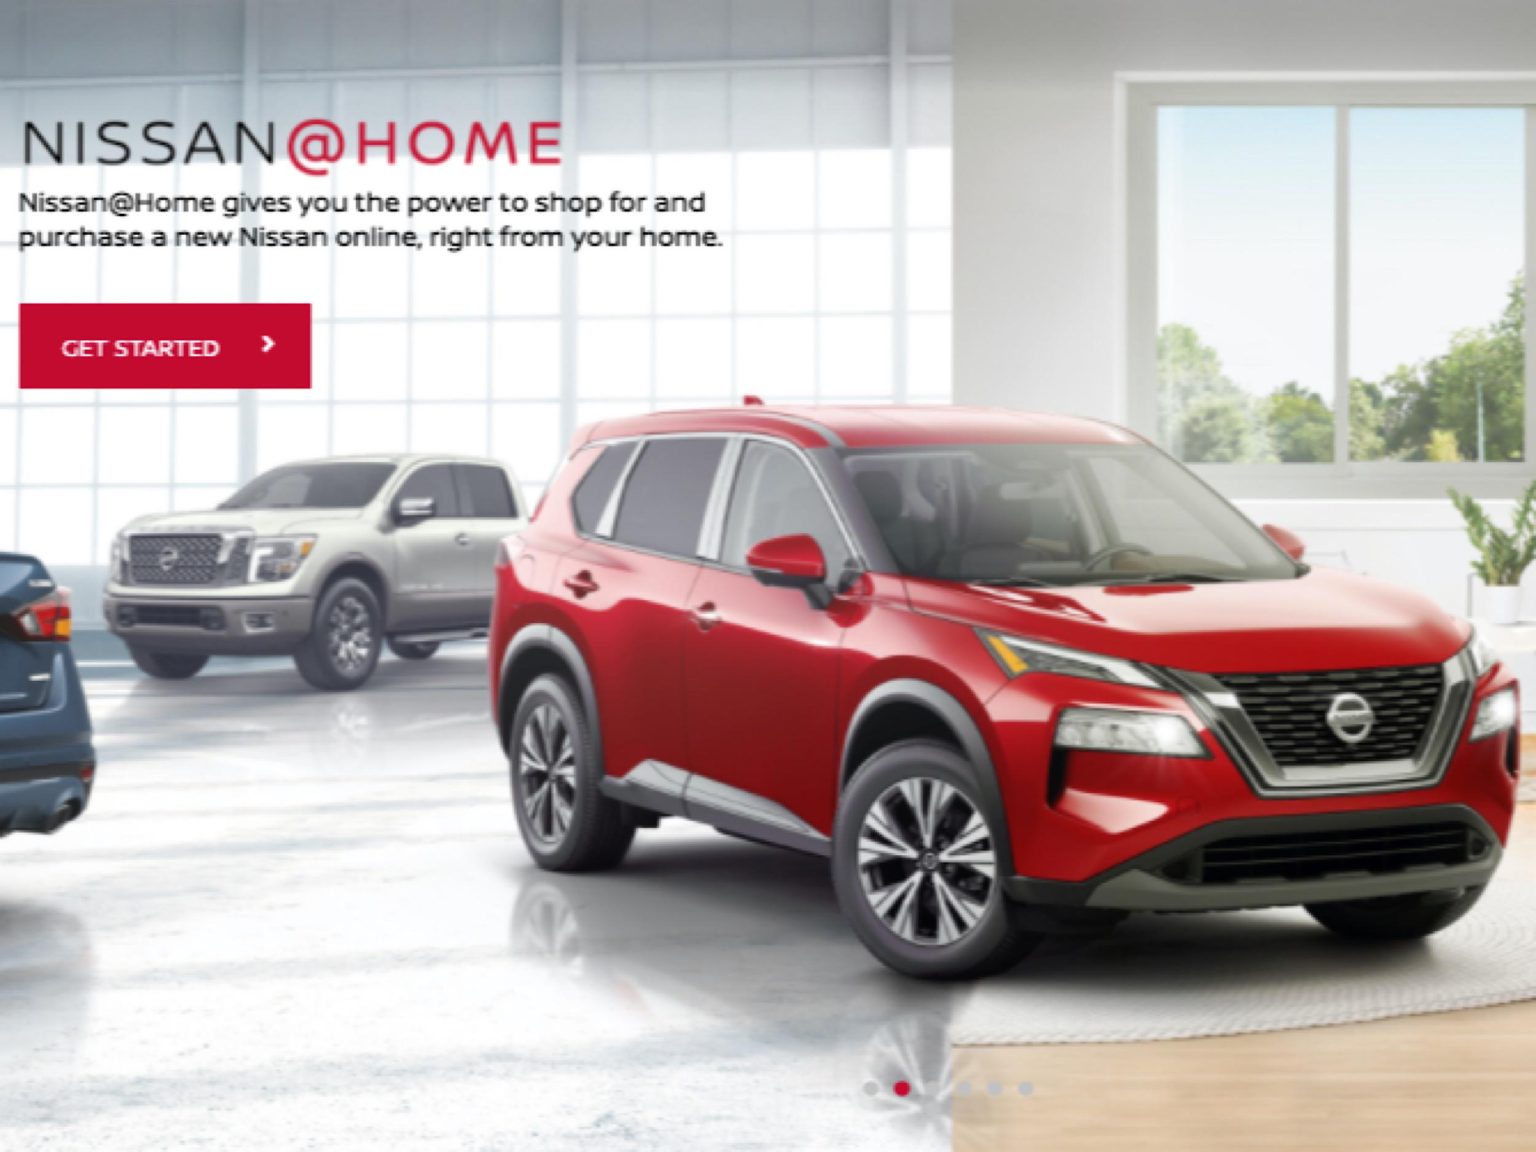 The Nissan@Home program will be available to shoppers in the U.S. this spring.